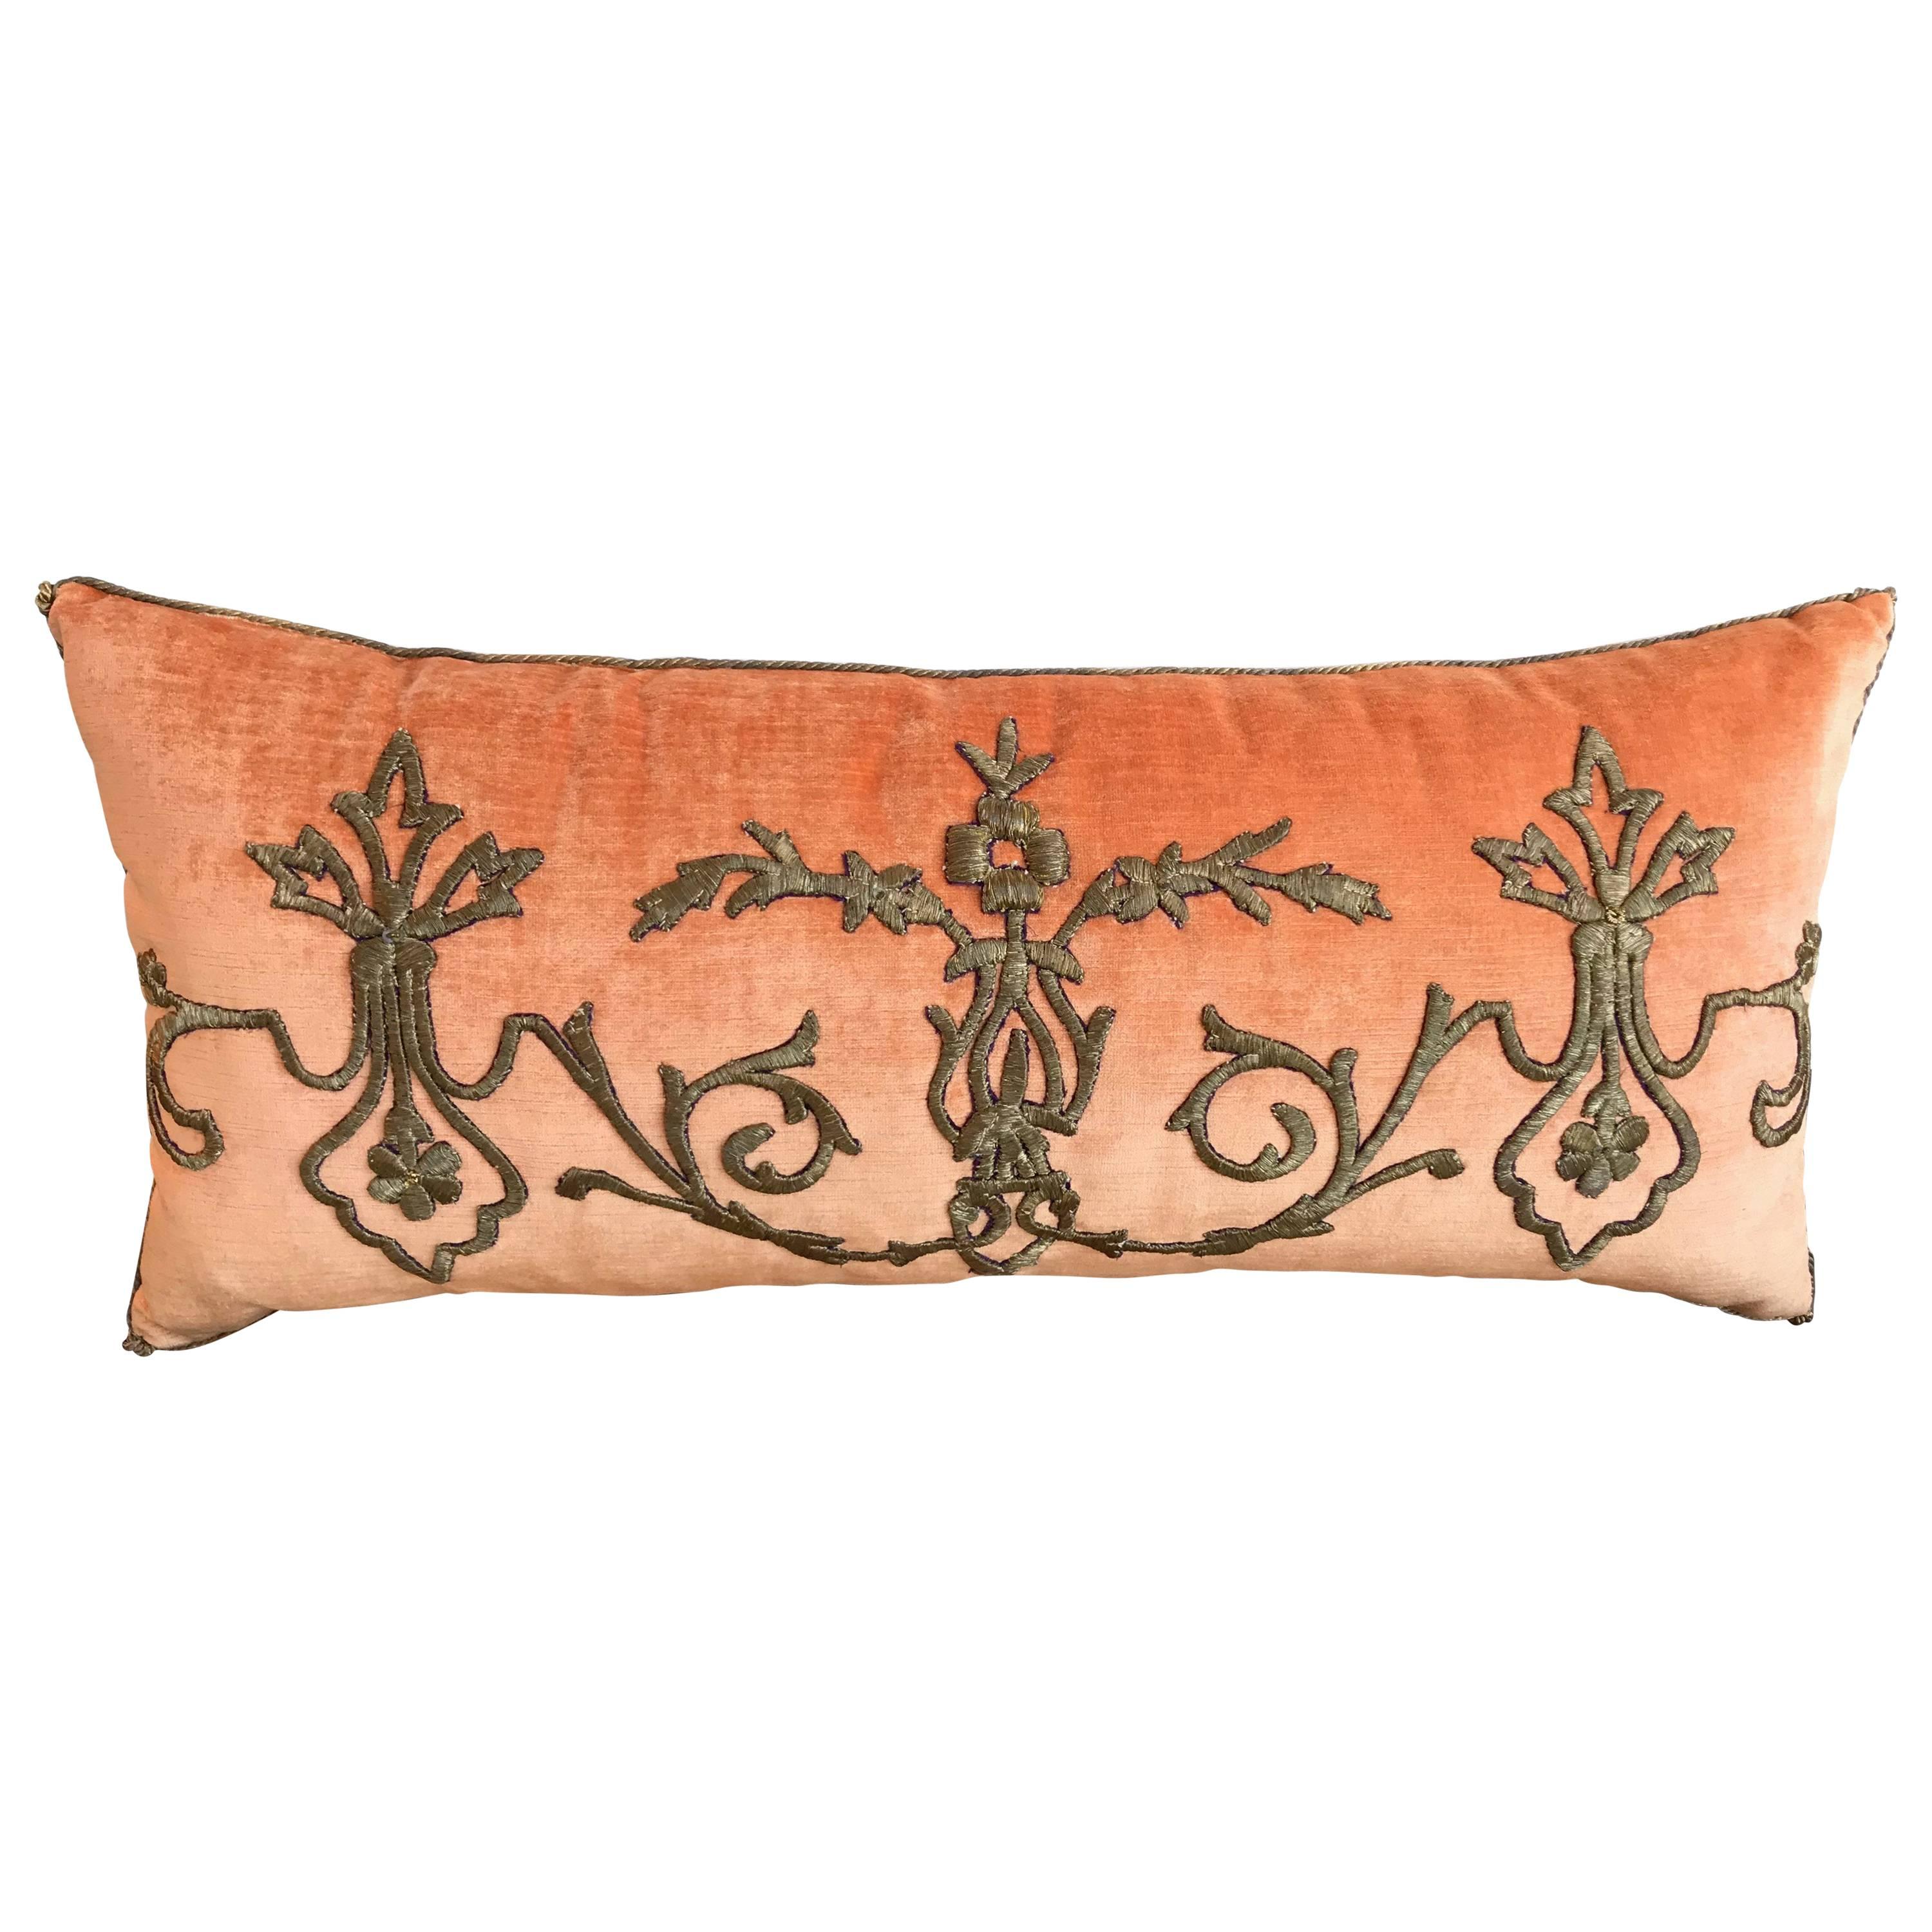 Antique Ottoman Empire Embroidered Pillow For Sale